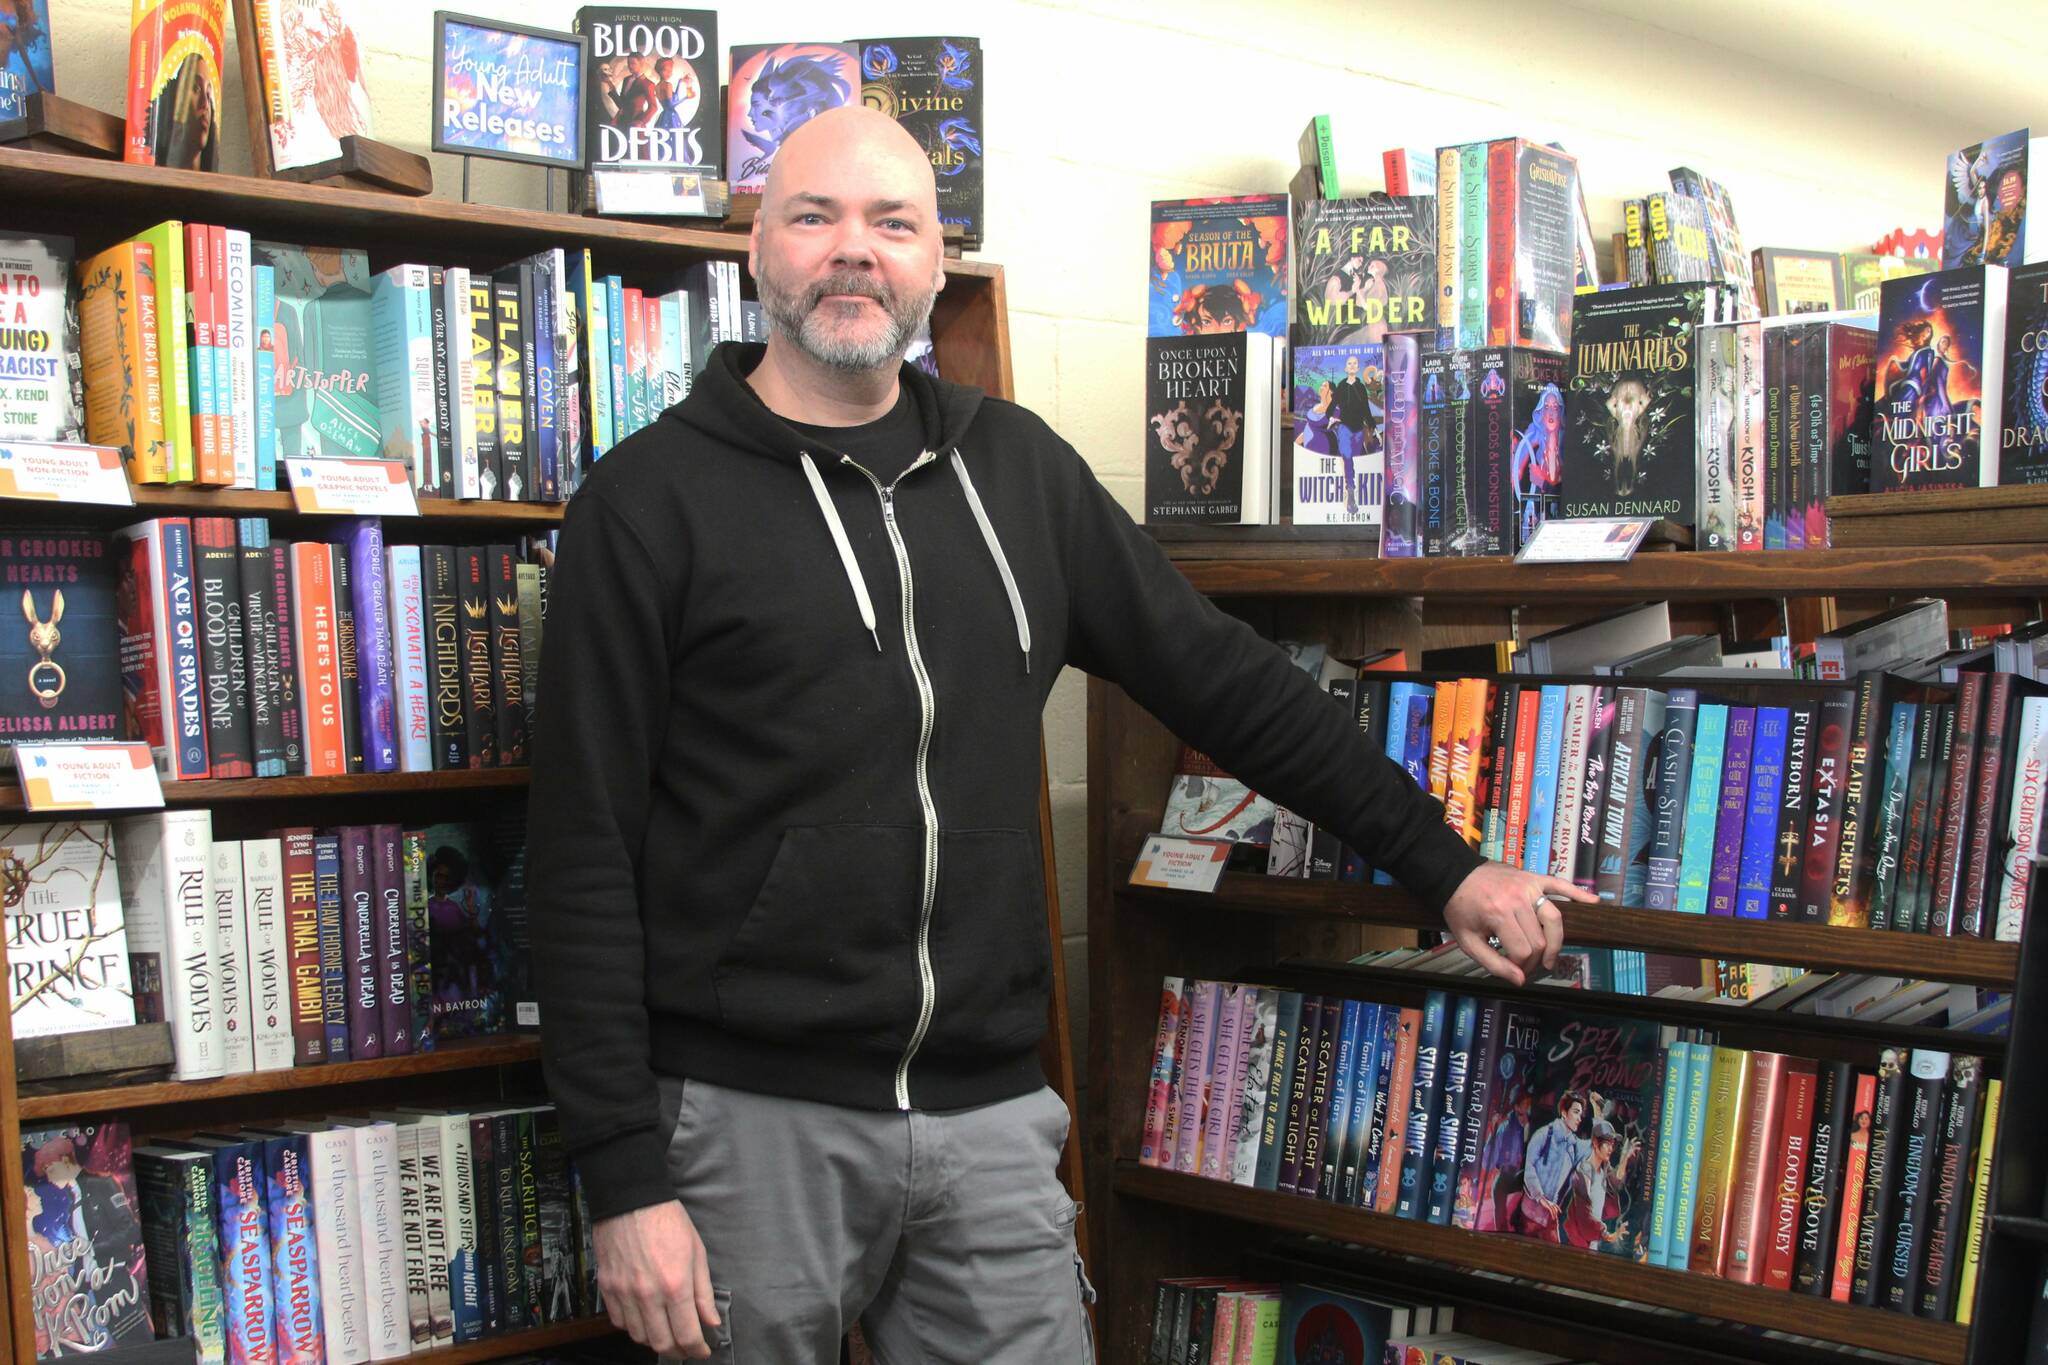 Photo by Karina Andrew/Whidbey News-Times
Matt Daniel represents the second generation in his family to own the Book Rack, the bookstore founded by his parents in 1983. The store celebrates its 40th anniversary this year.